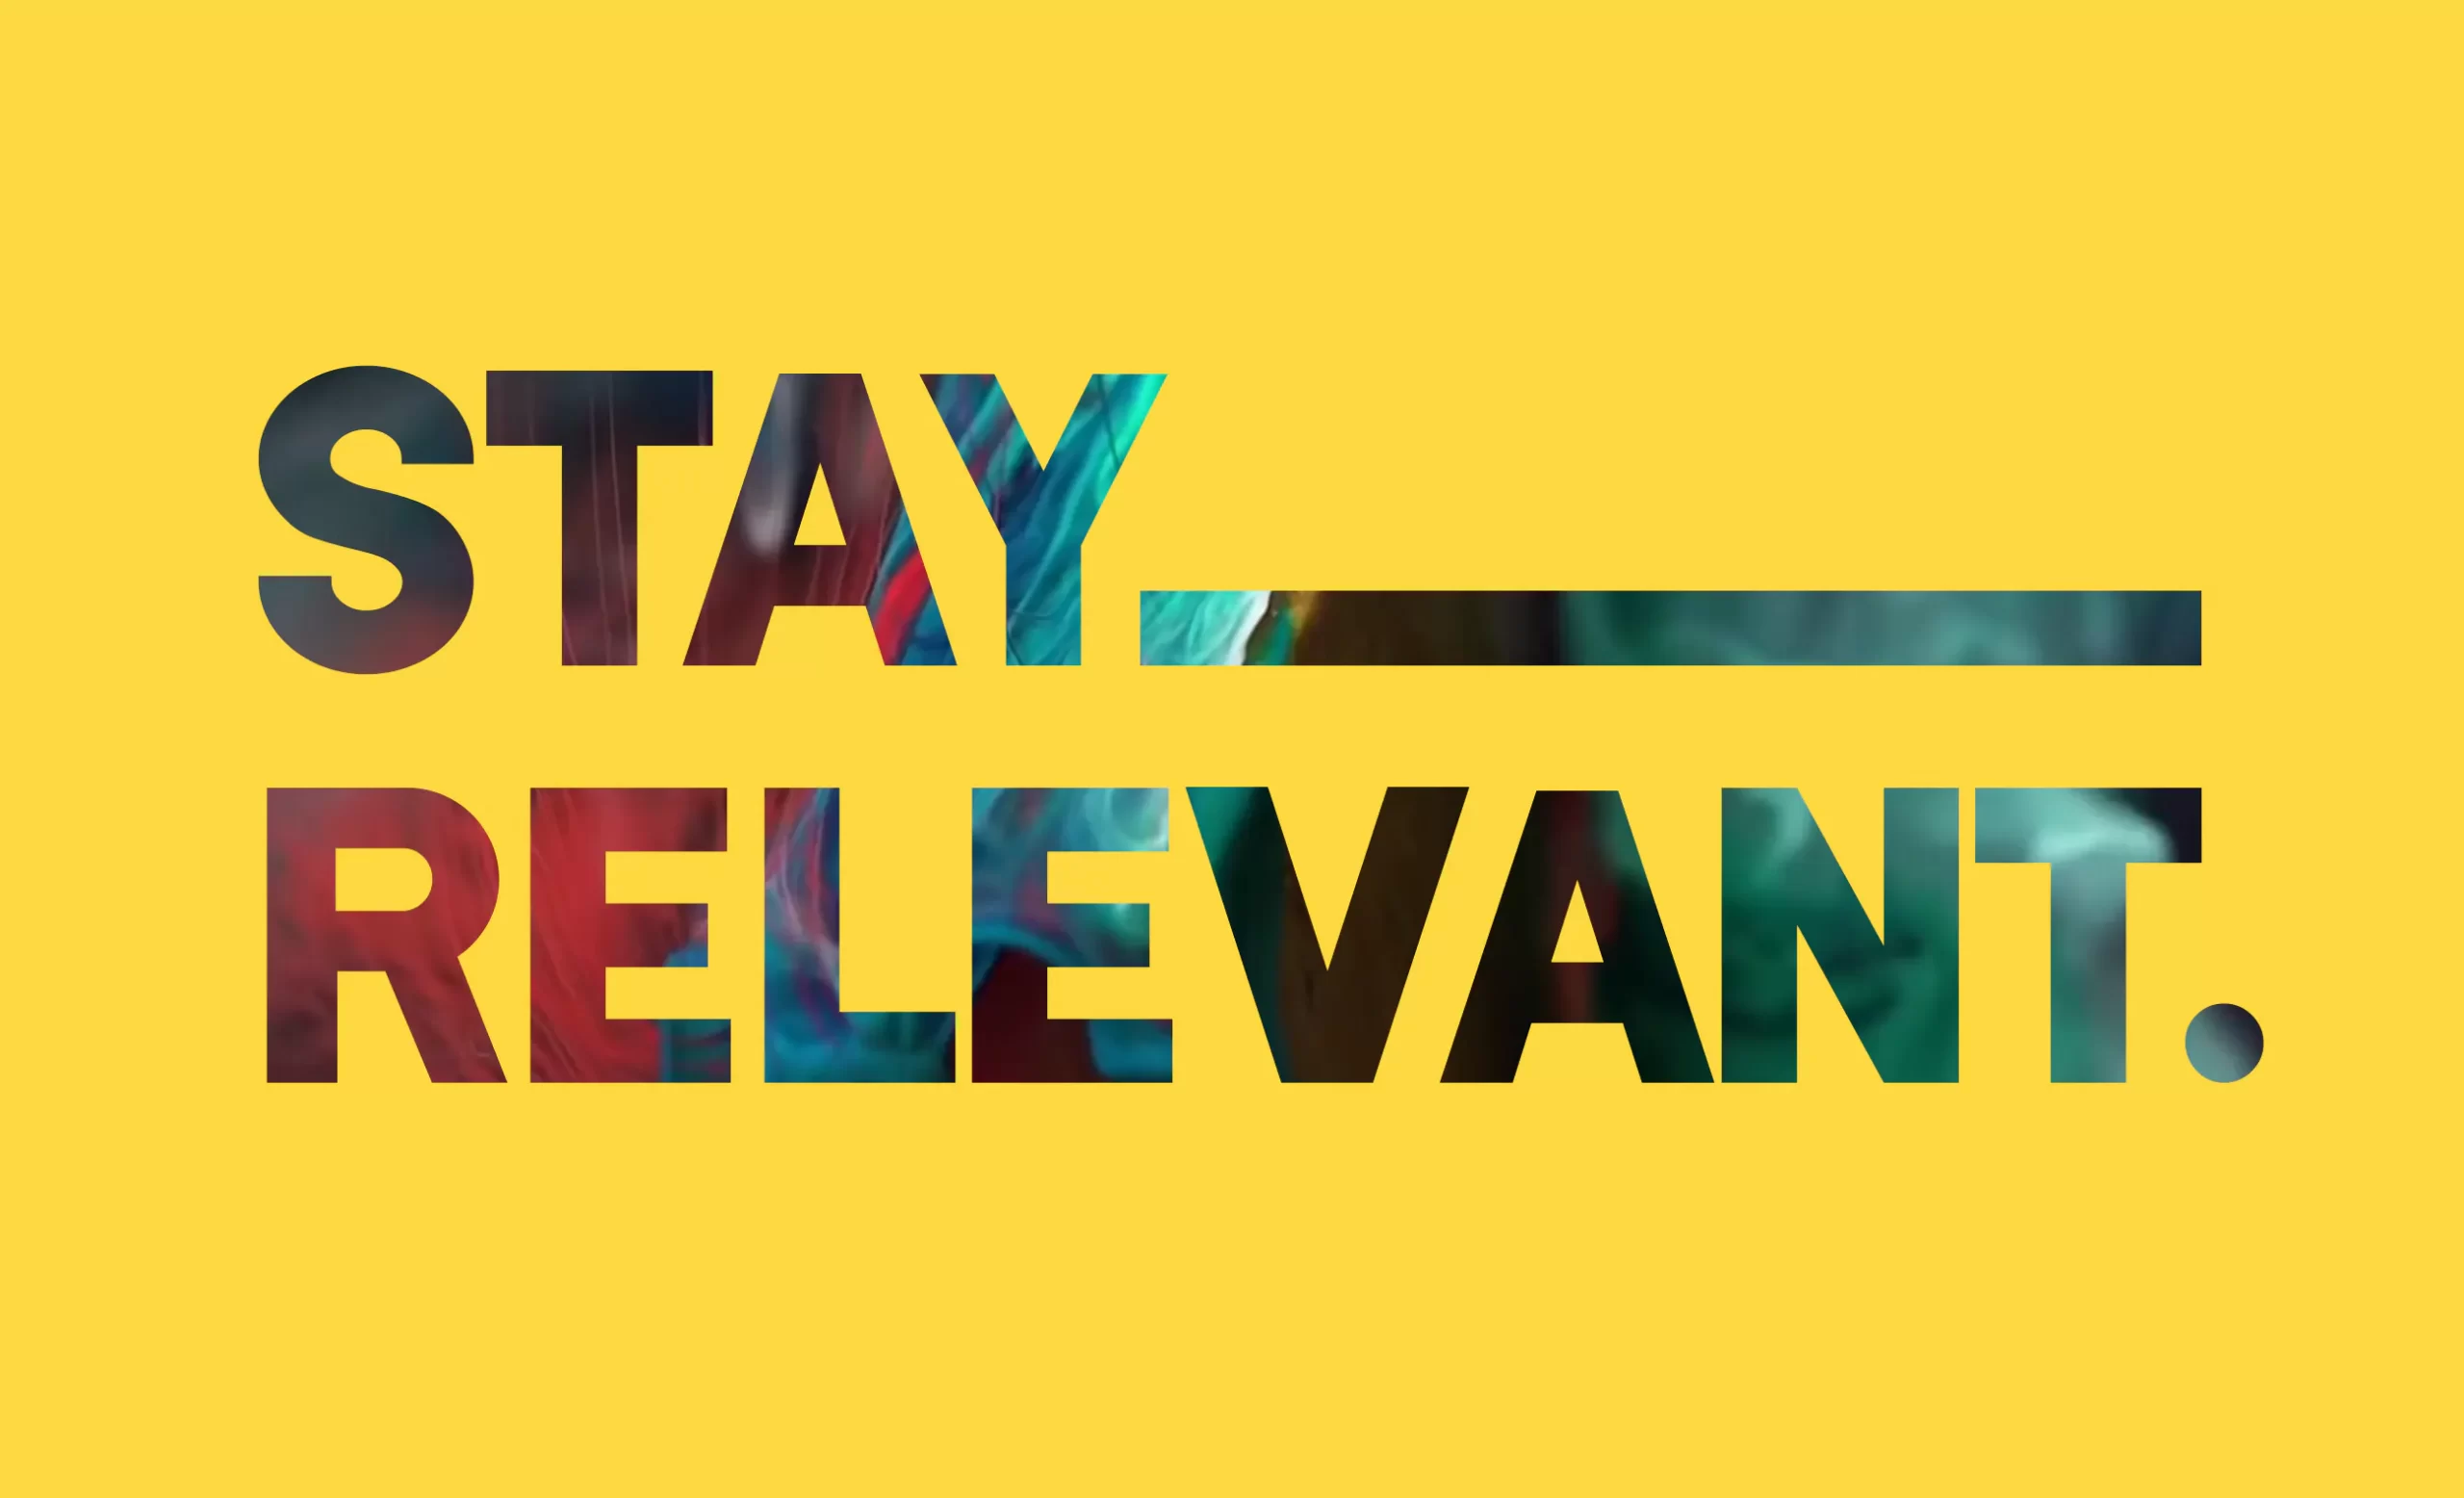 Stay Relevant.